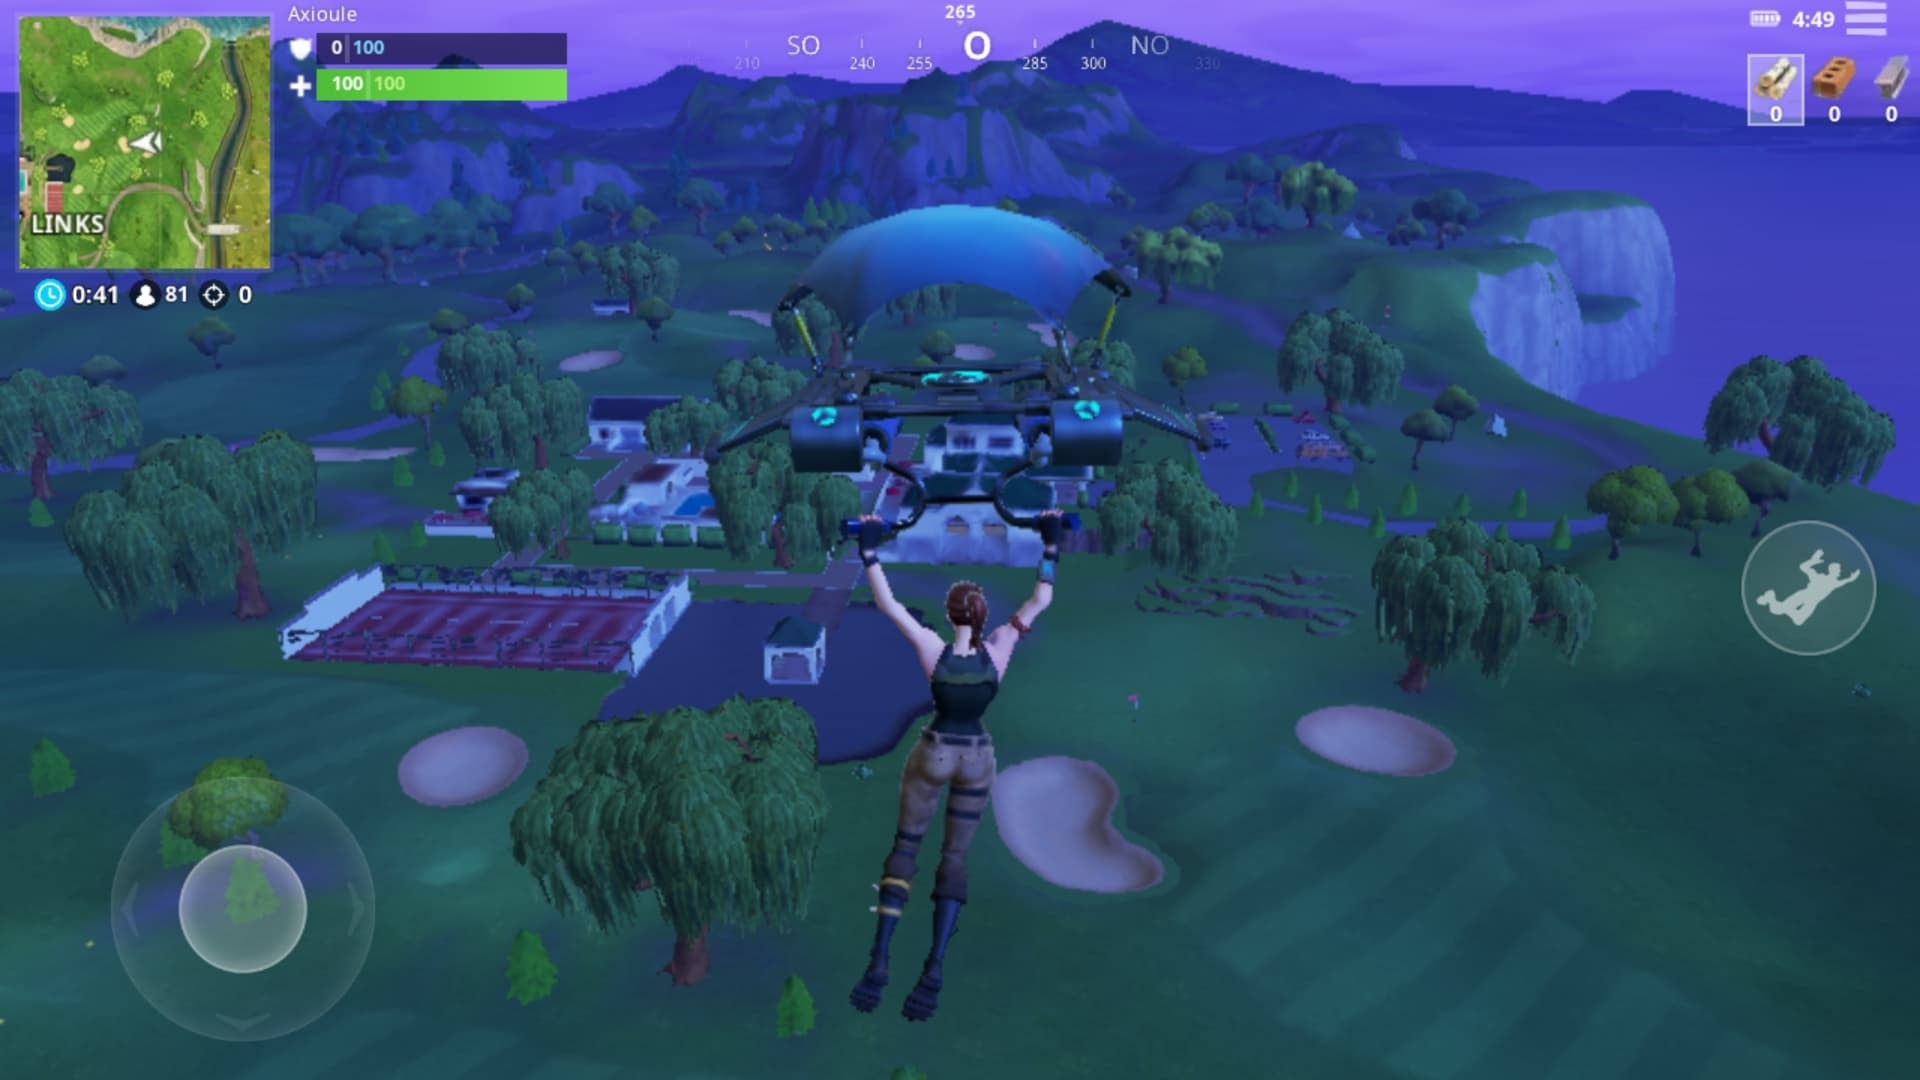 Telecharger Fortnite Apk Android Gratuit - screenshoot fortnite test android